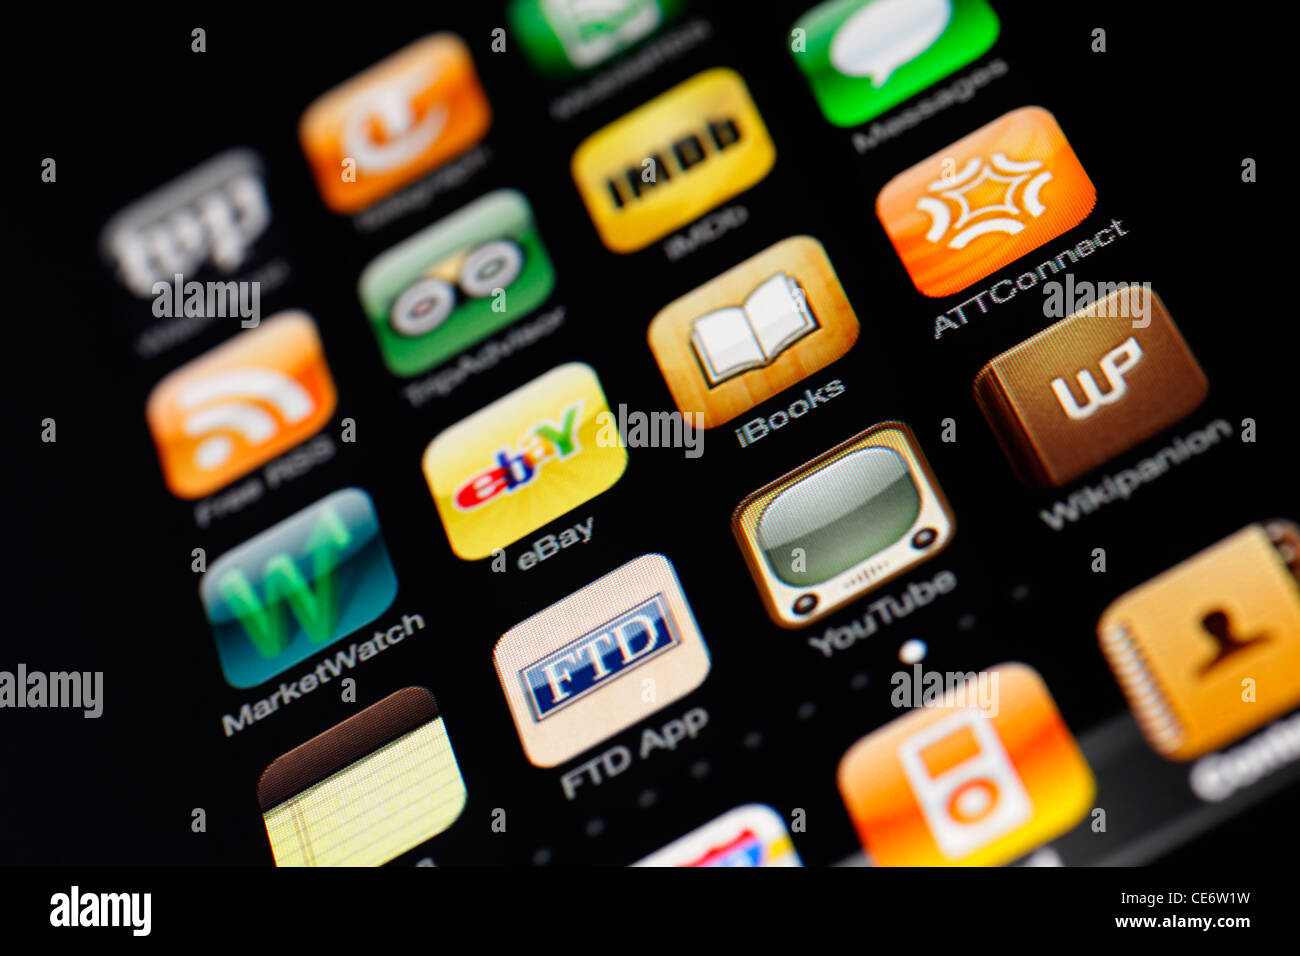 Muenster, Germany, January 26, 2012: Image of the iphone touch screen. Display shows a collection of useful apps with orange and Stock Photo